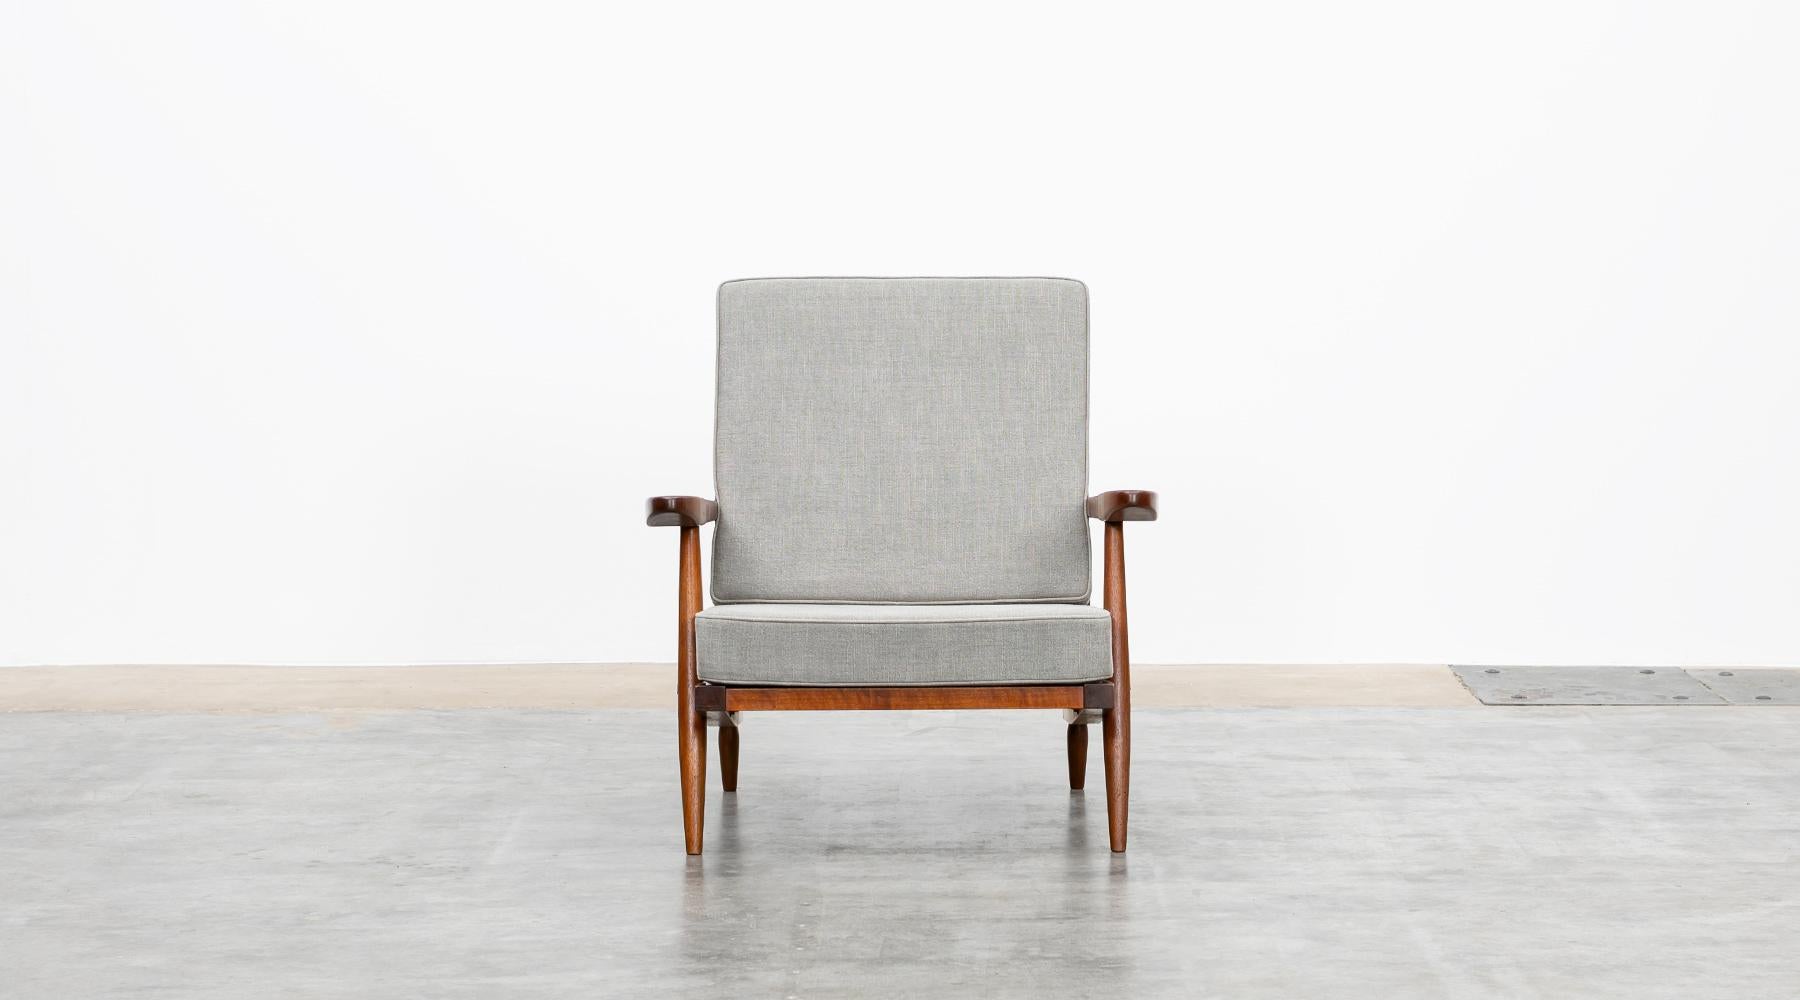 1960s Walnut, Grey Upholstery Armchair with Ottoman by George Nakashima In Good Condition For Sale In Frankfurt, Hessen, DE